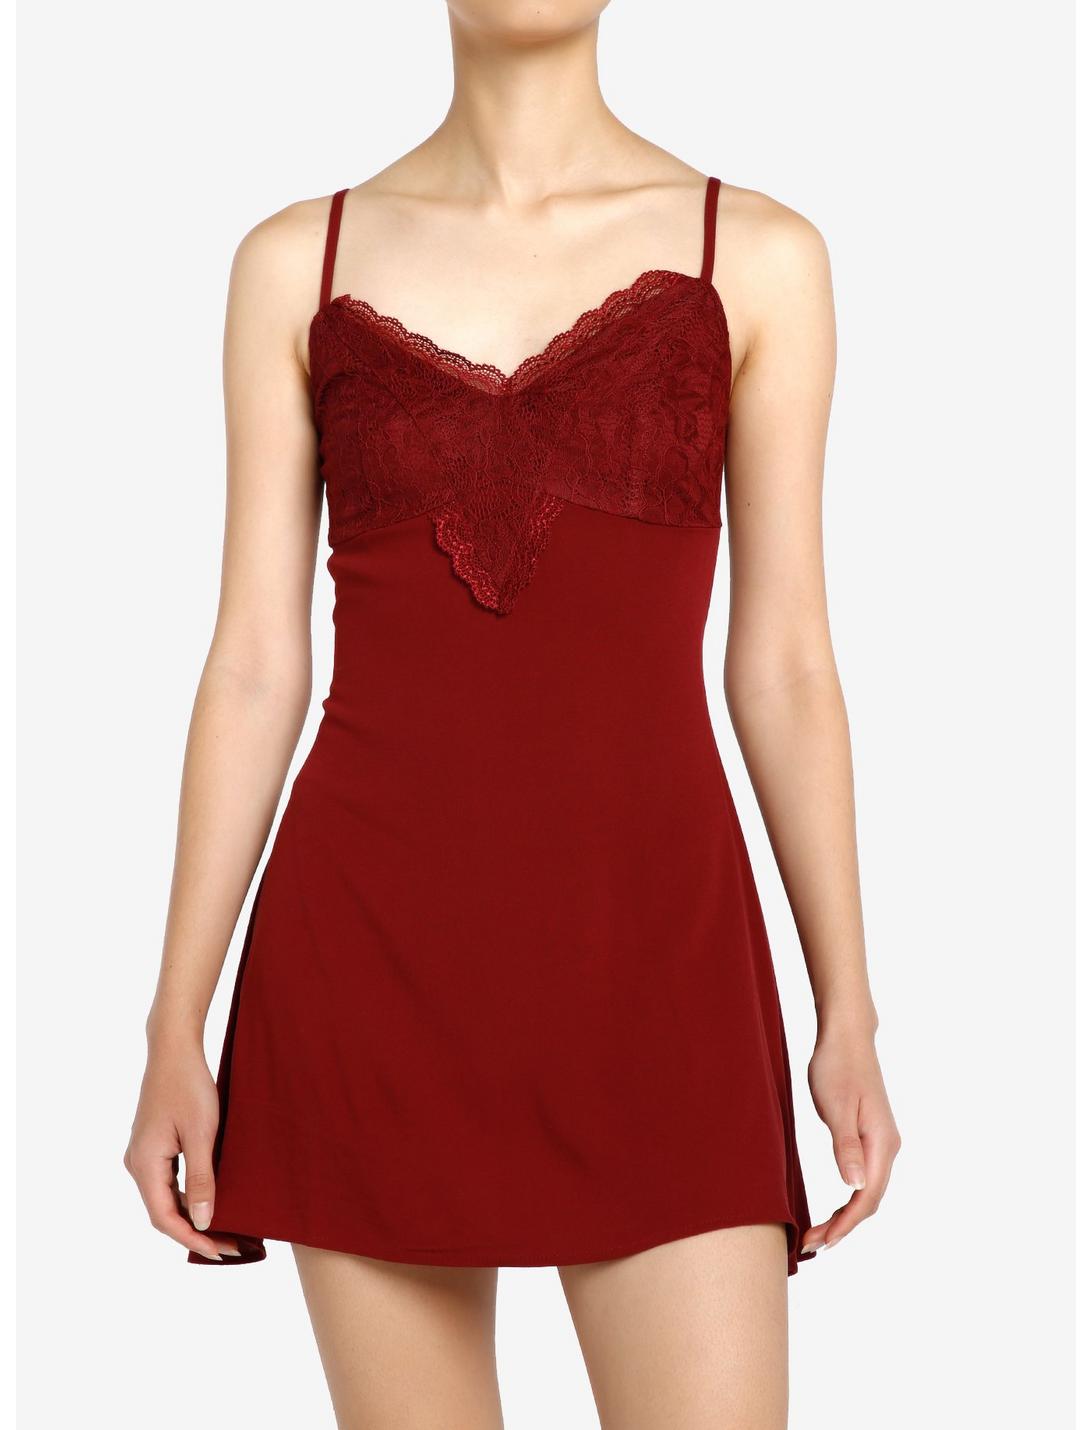 Thorn & Fable Maroon Lace Slip Dress, PURPLE, hi-res